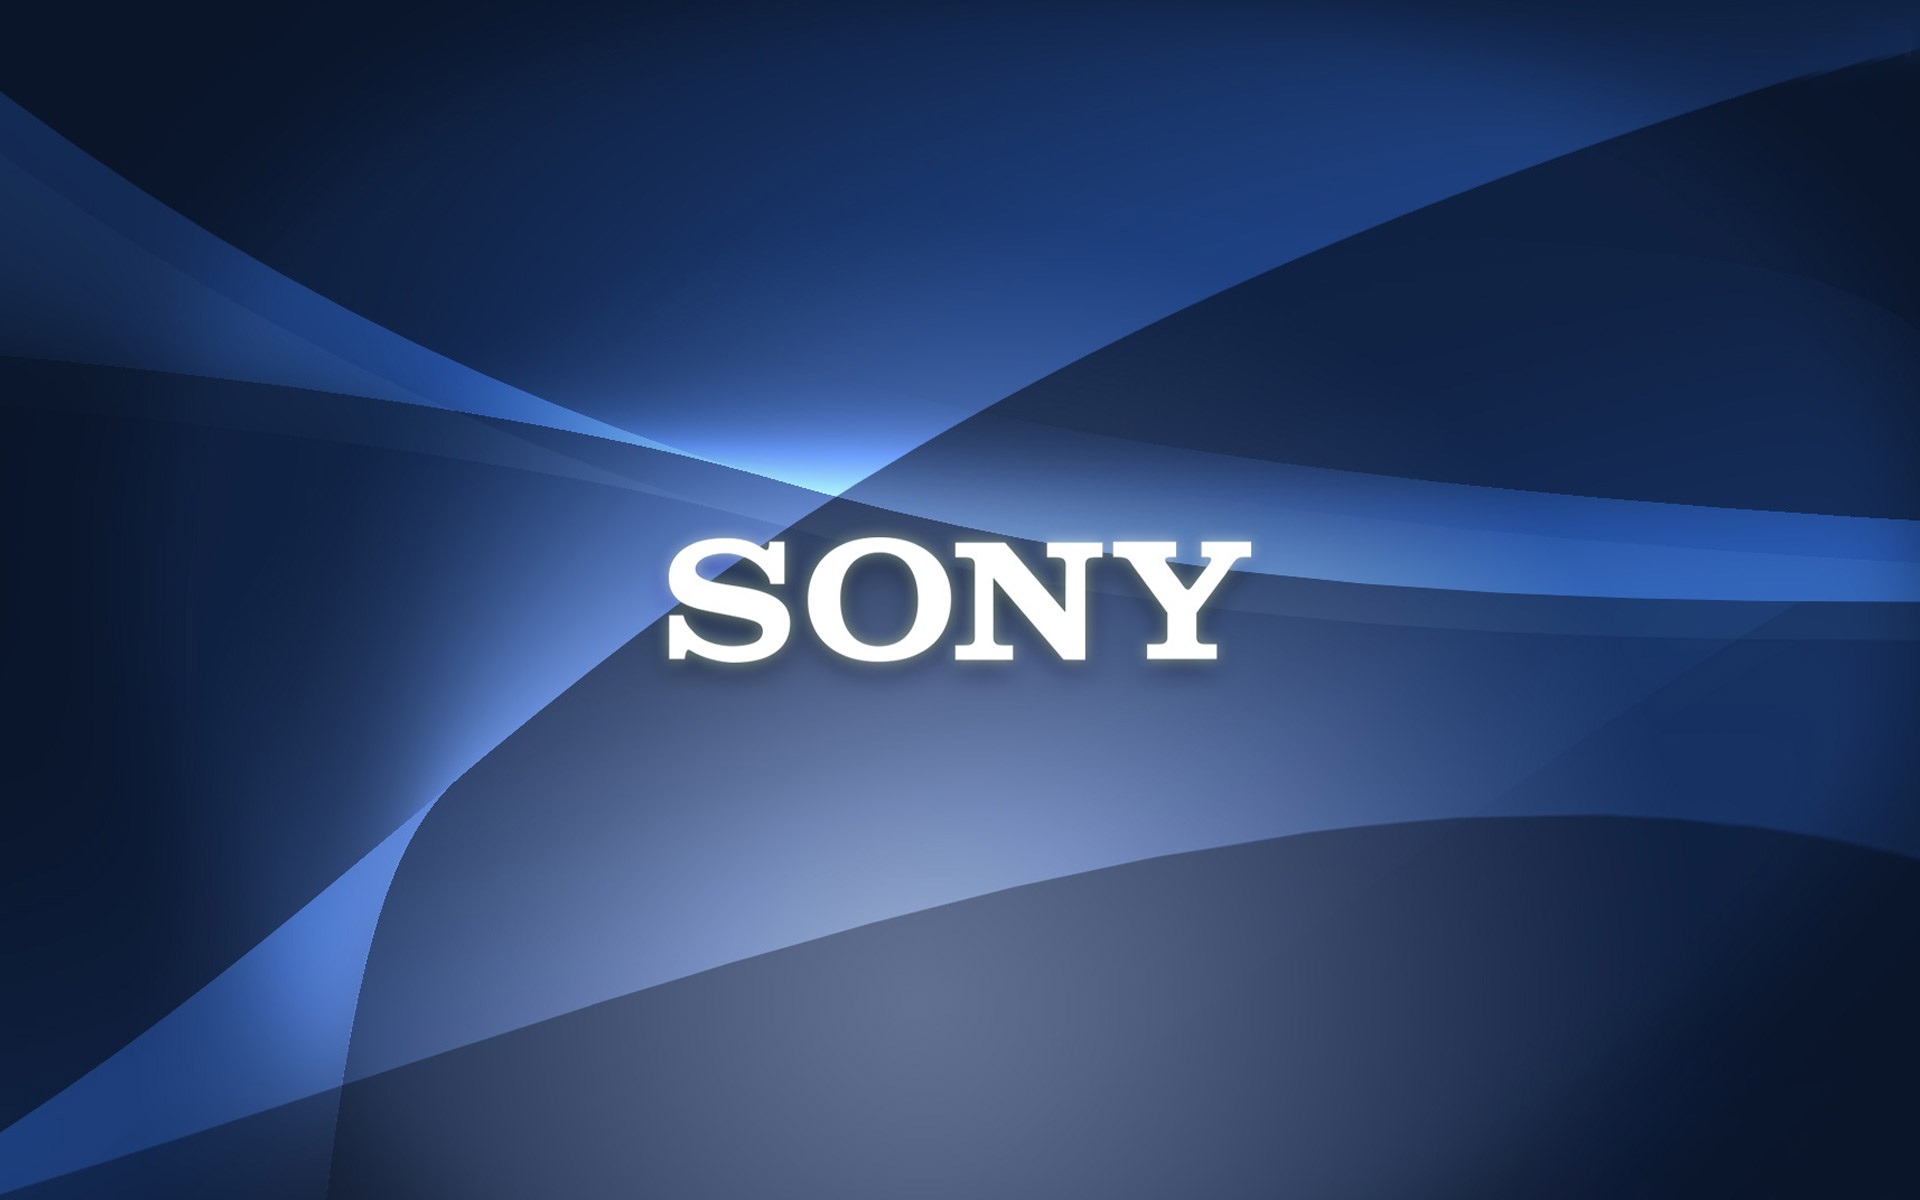 Sony logo, abstract background wallpaper | brands and logos | Wallpaper ...